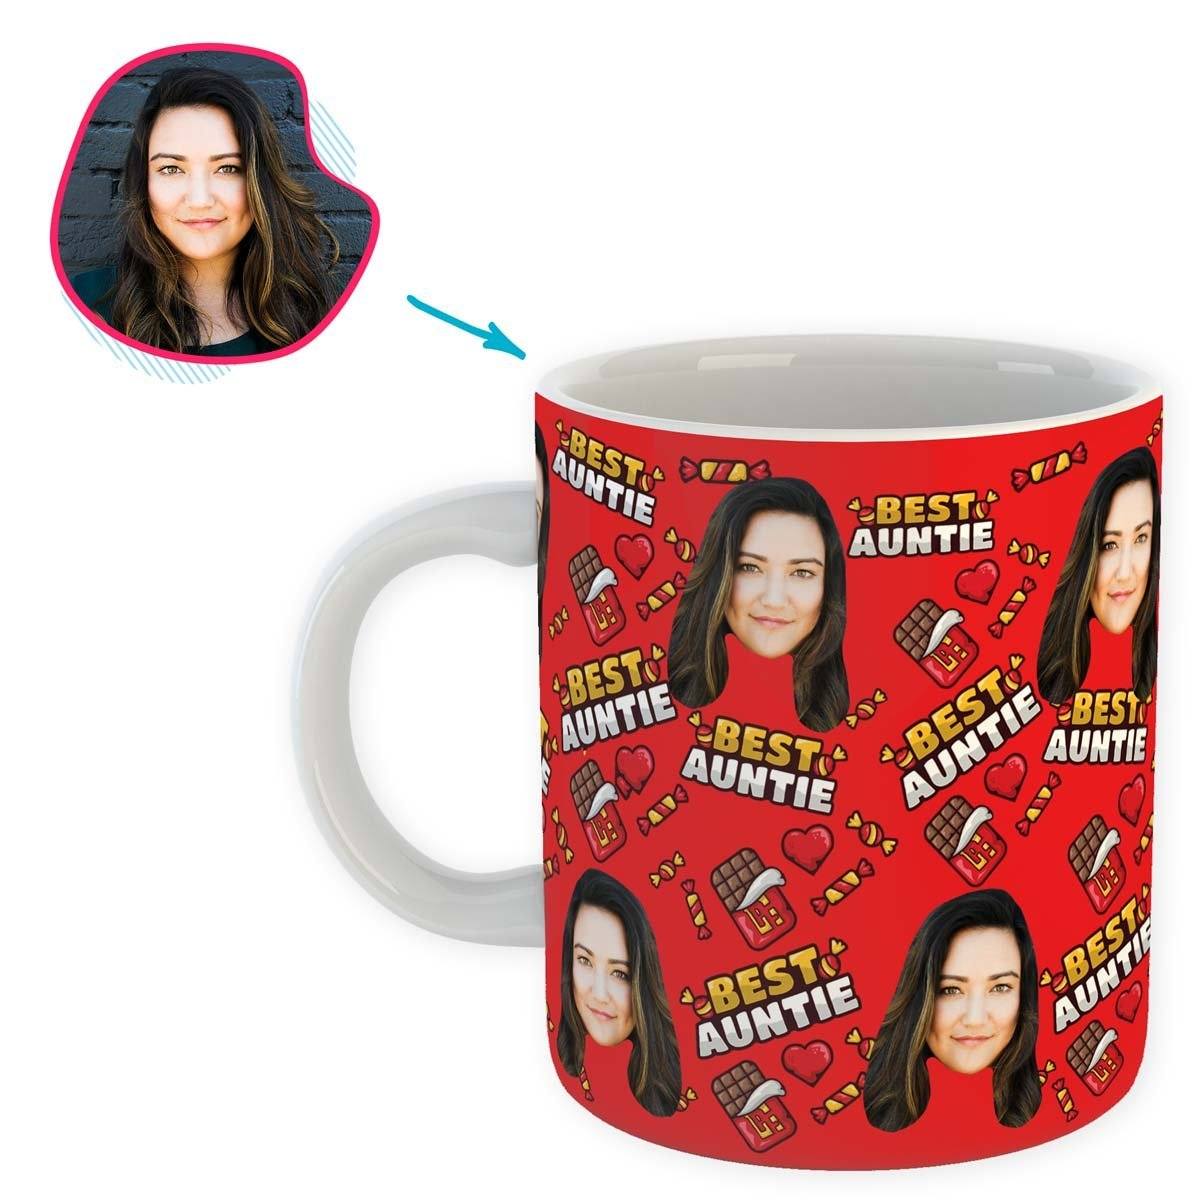 Red Auntie personalized mug with photo of face printed on it